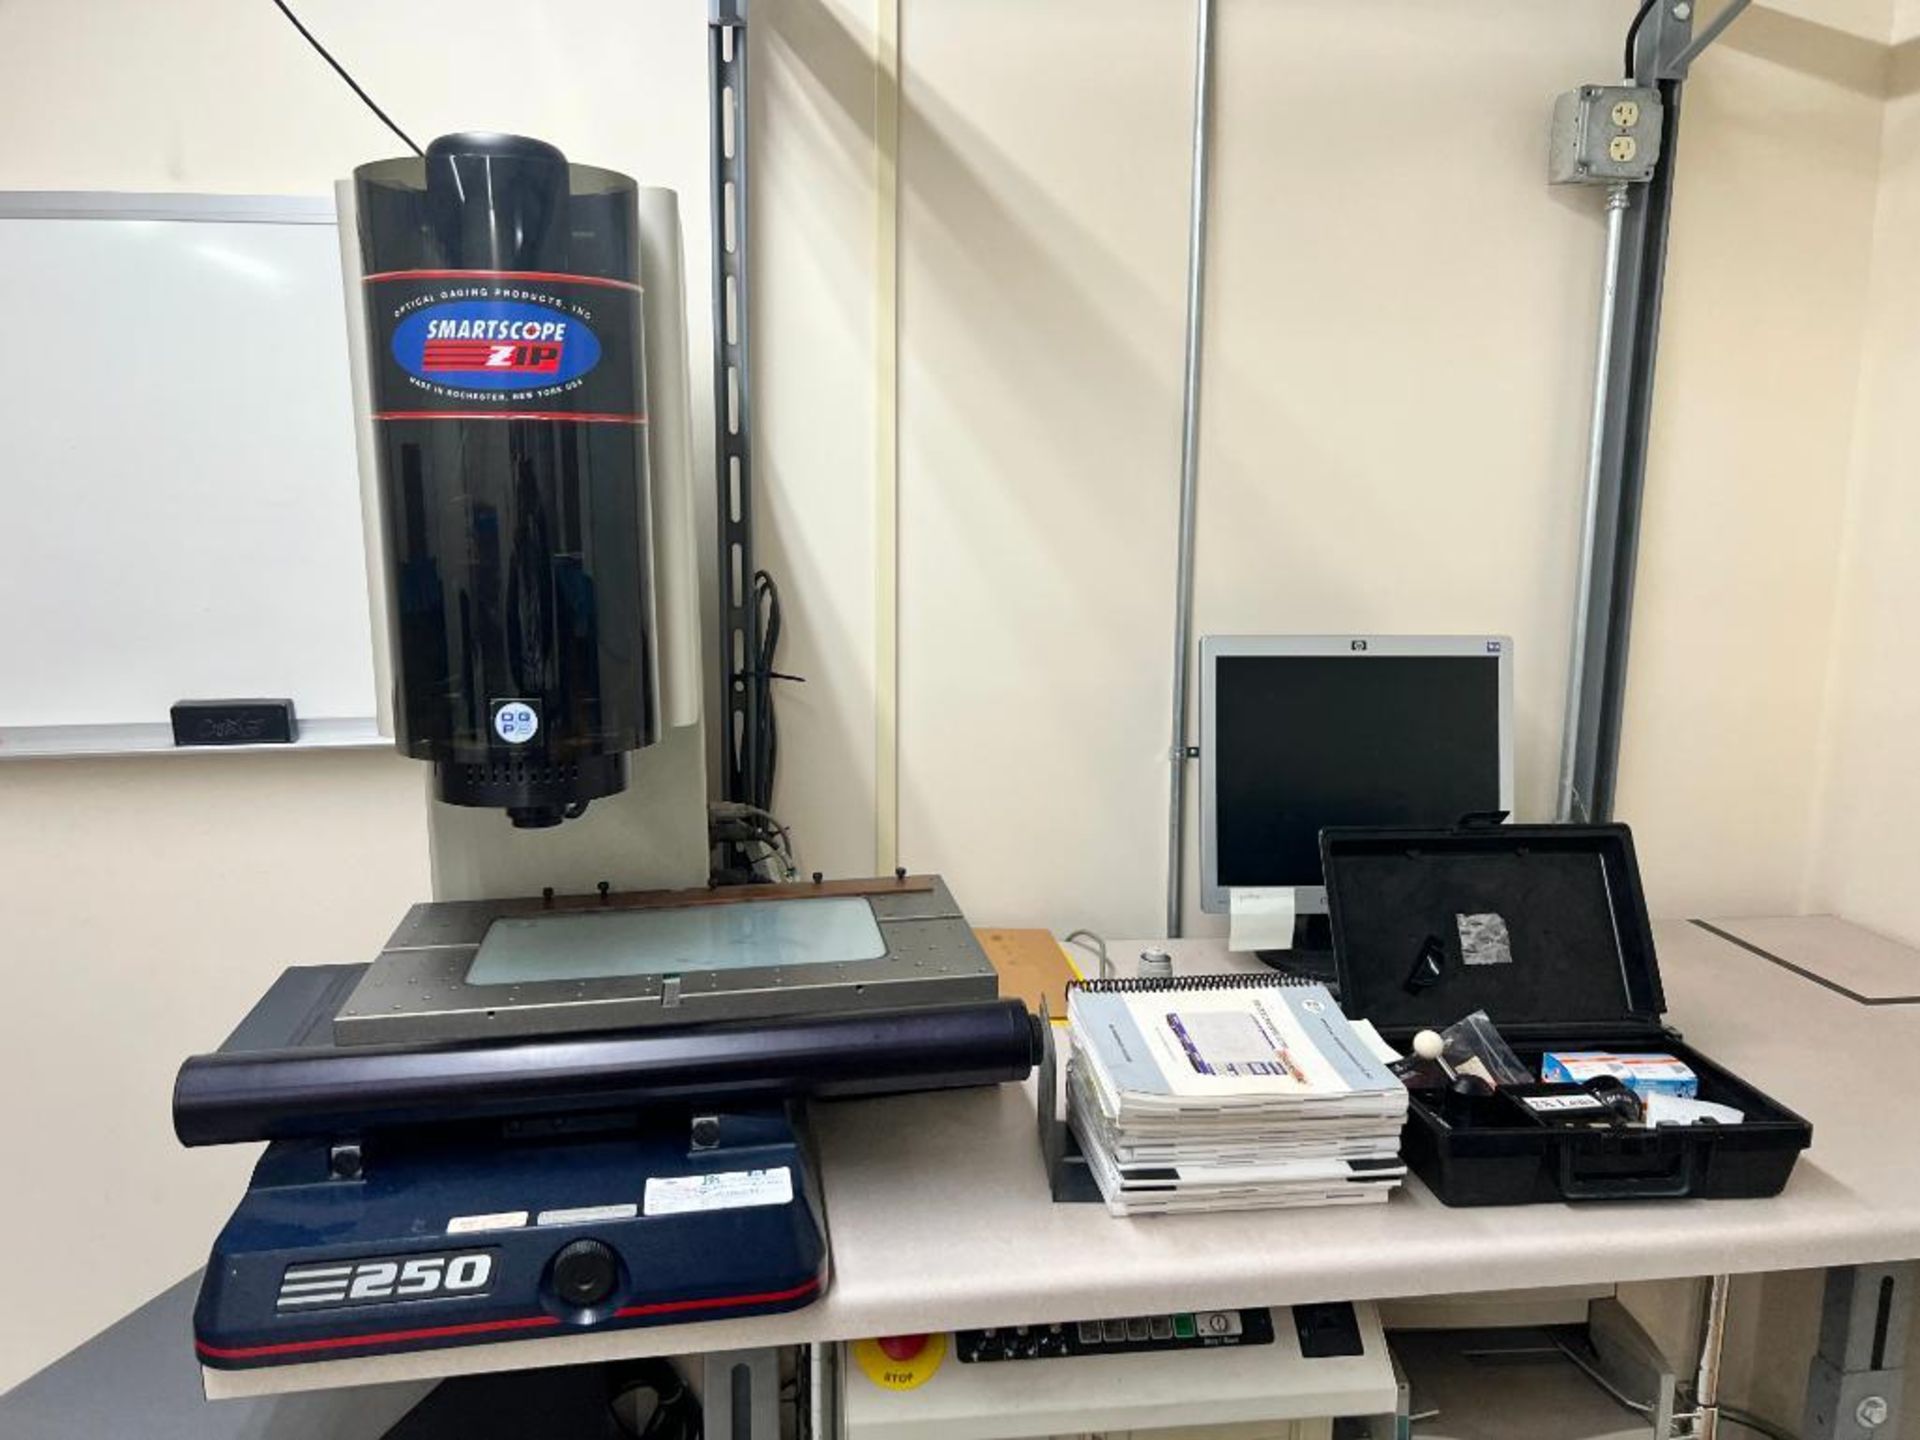 Optical Gaging Products Smartscope Zip, Model 250, w/ Controller, Monitor, & Workstation Table